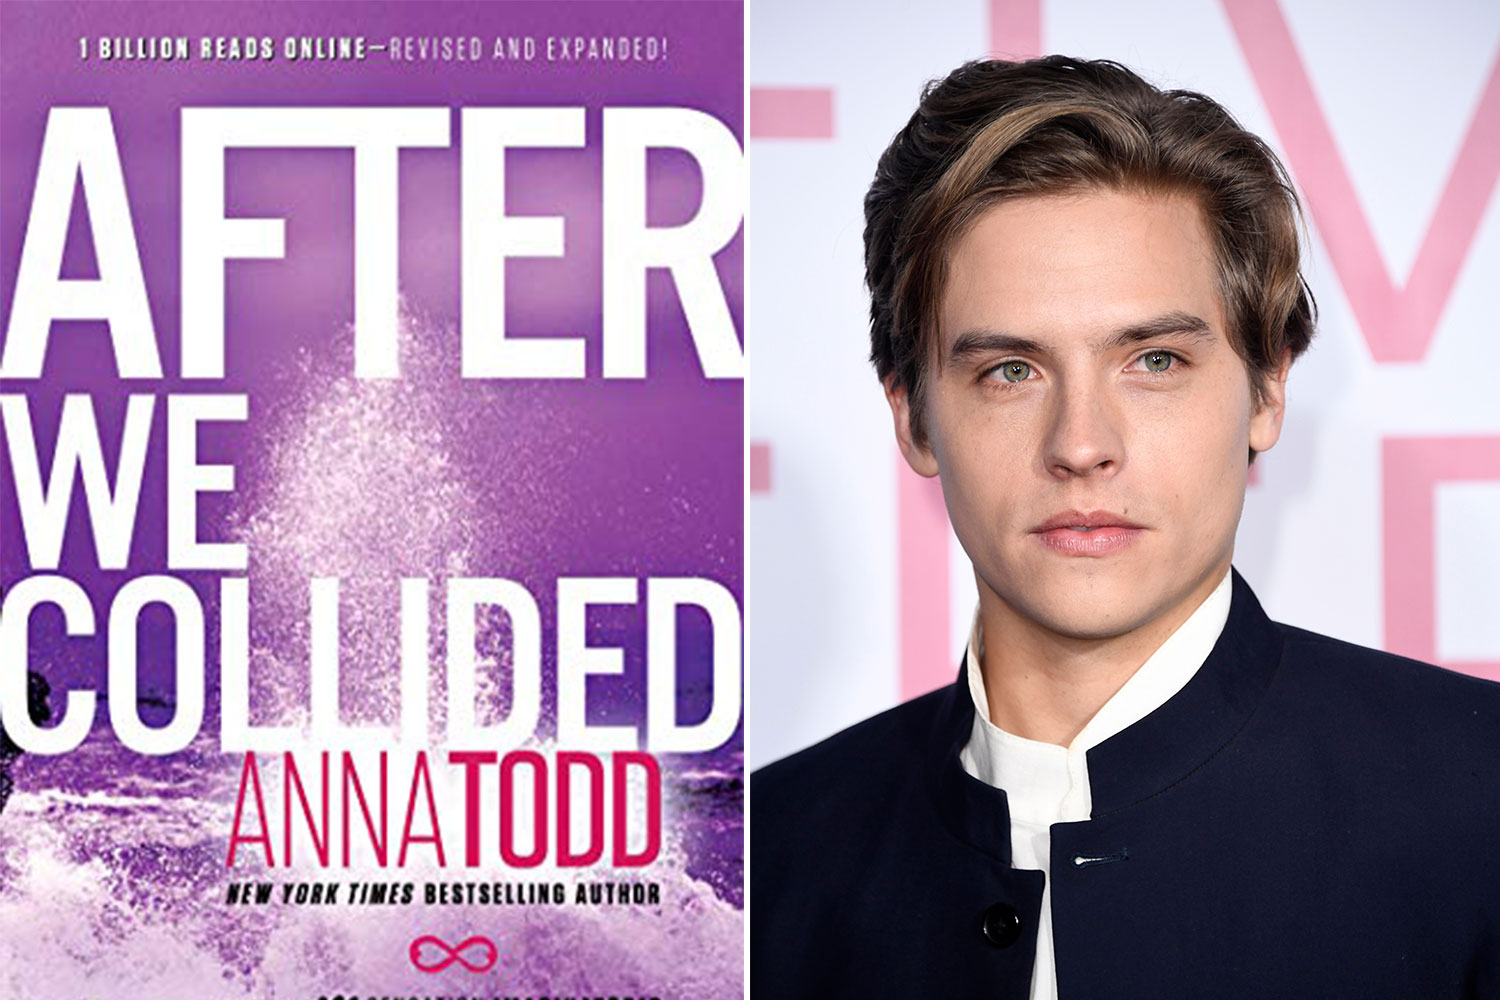 Dylan Sprouse has been cast in Harry Styles' fan-fic movie 'After' sequel '...